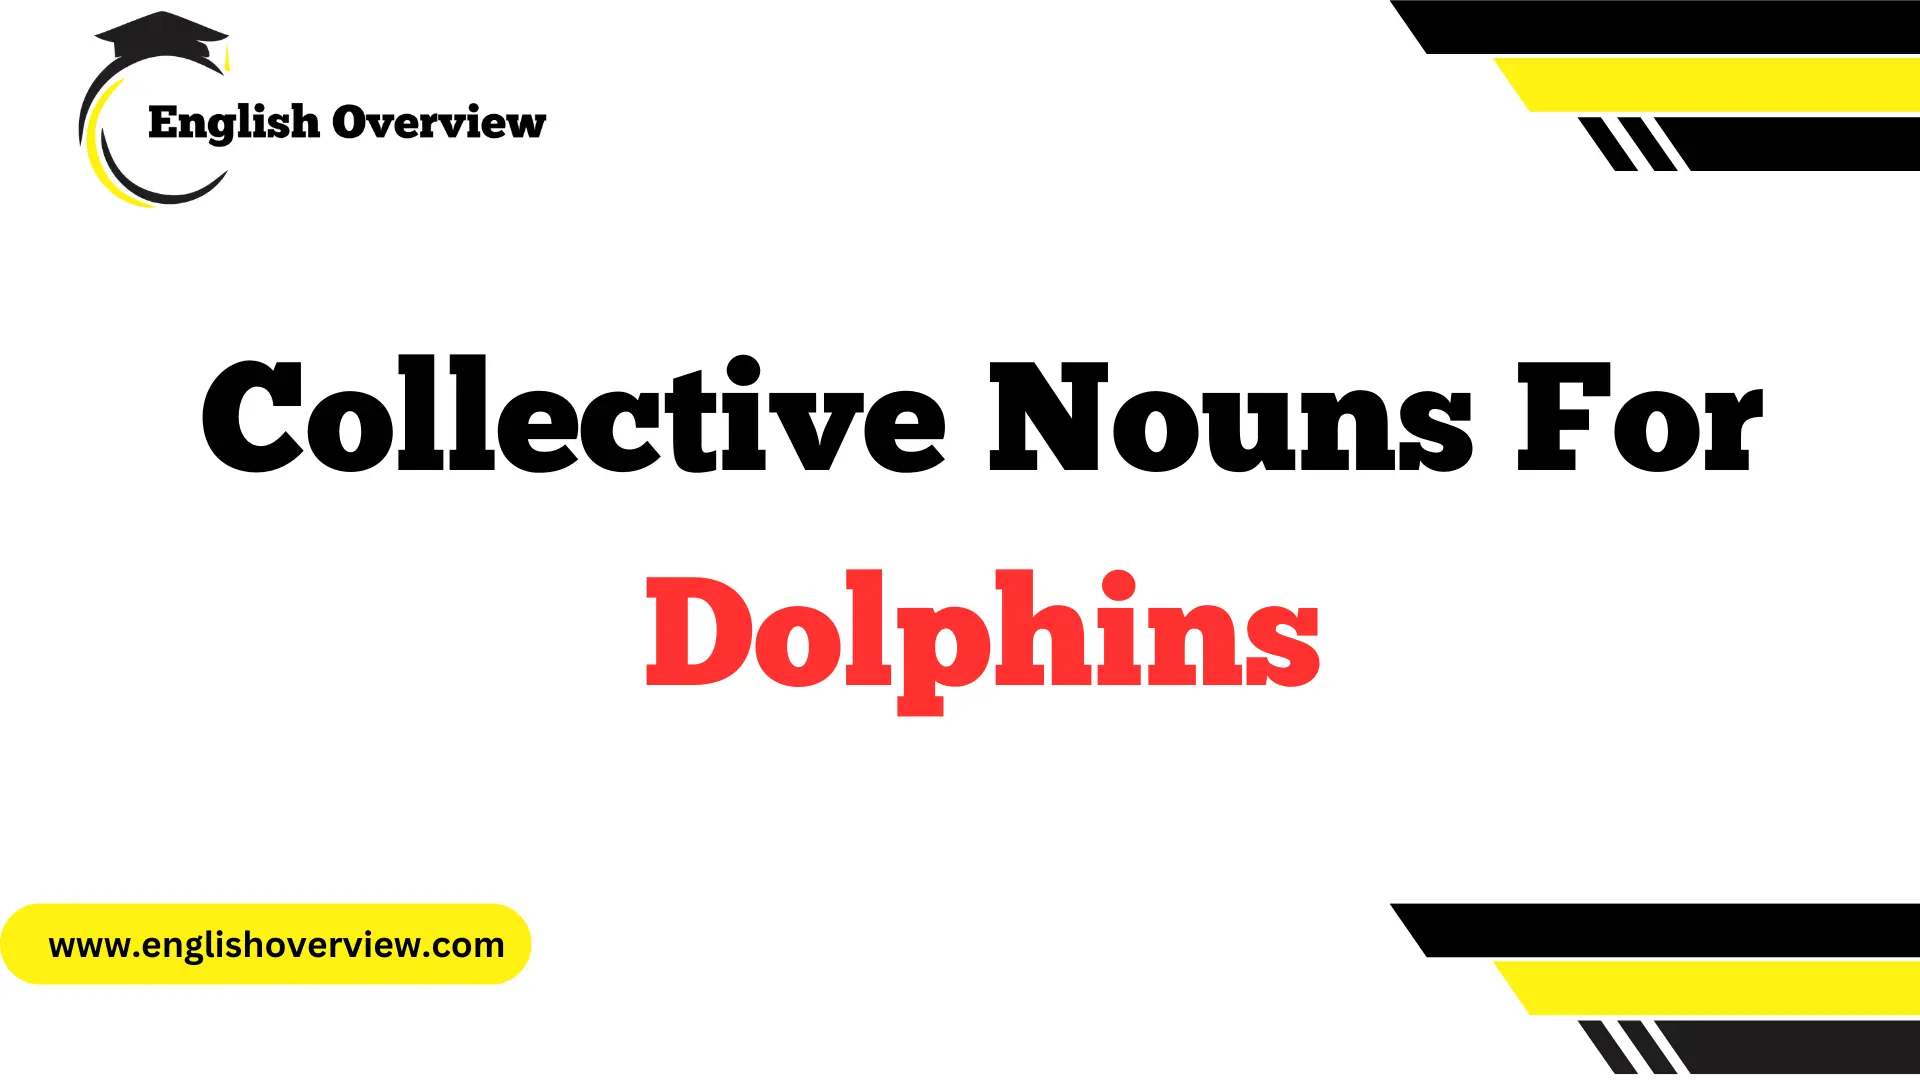 Collective Nouns For Dolphins